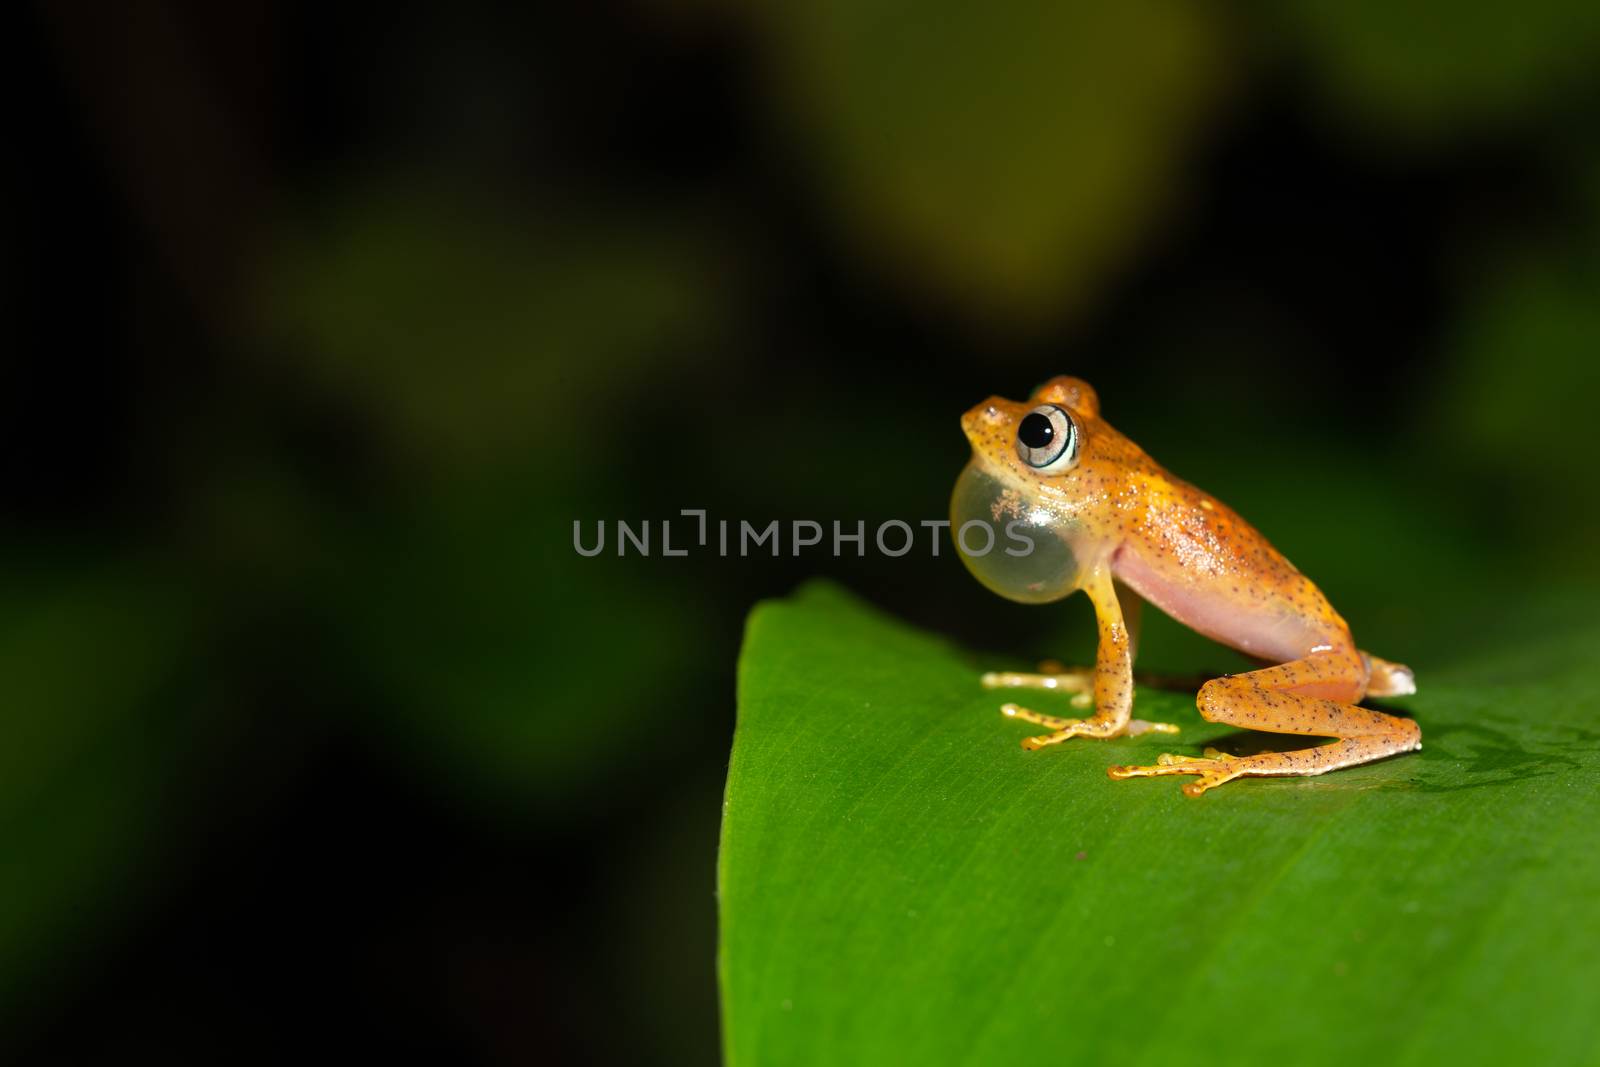 A small orange frog is sitting on a leaf by 25ehaag6